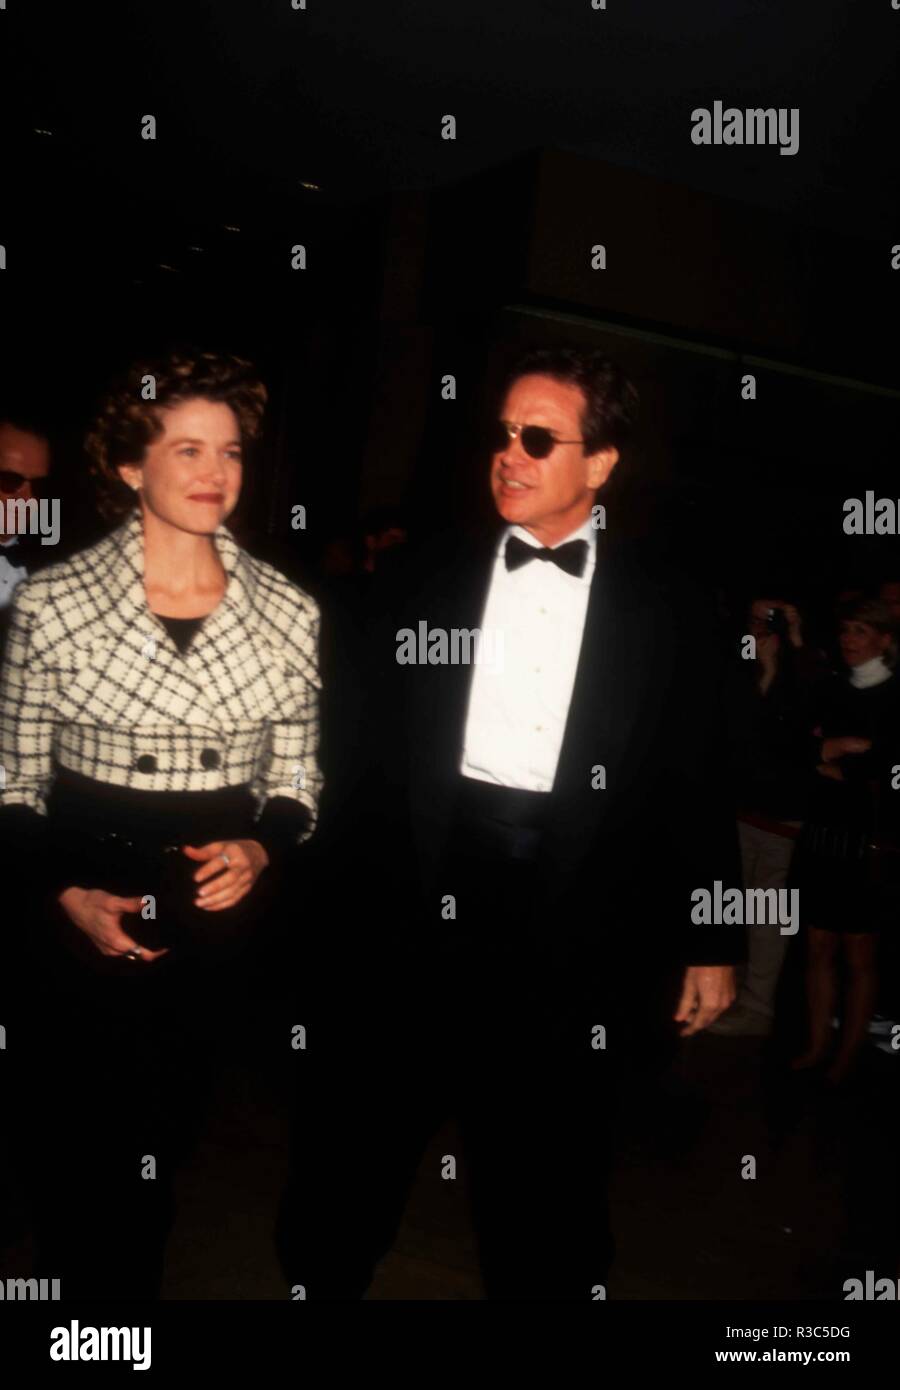 BEVERLY HILLS, CA - JANUARY 29: Actress Annette Bening and actor Warren Beatty attend The Daily Variety Salutes Army Archerd on January 29, 1993 at the Beverly Hilton Hotel in Beverly Hills, California. Photo by Barry King/Alamy Stock Photo Stock Photo